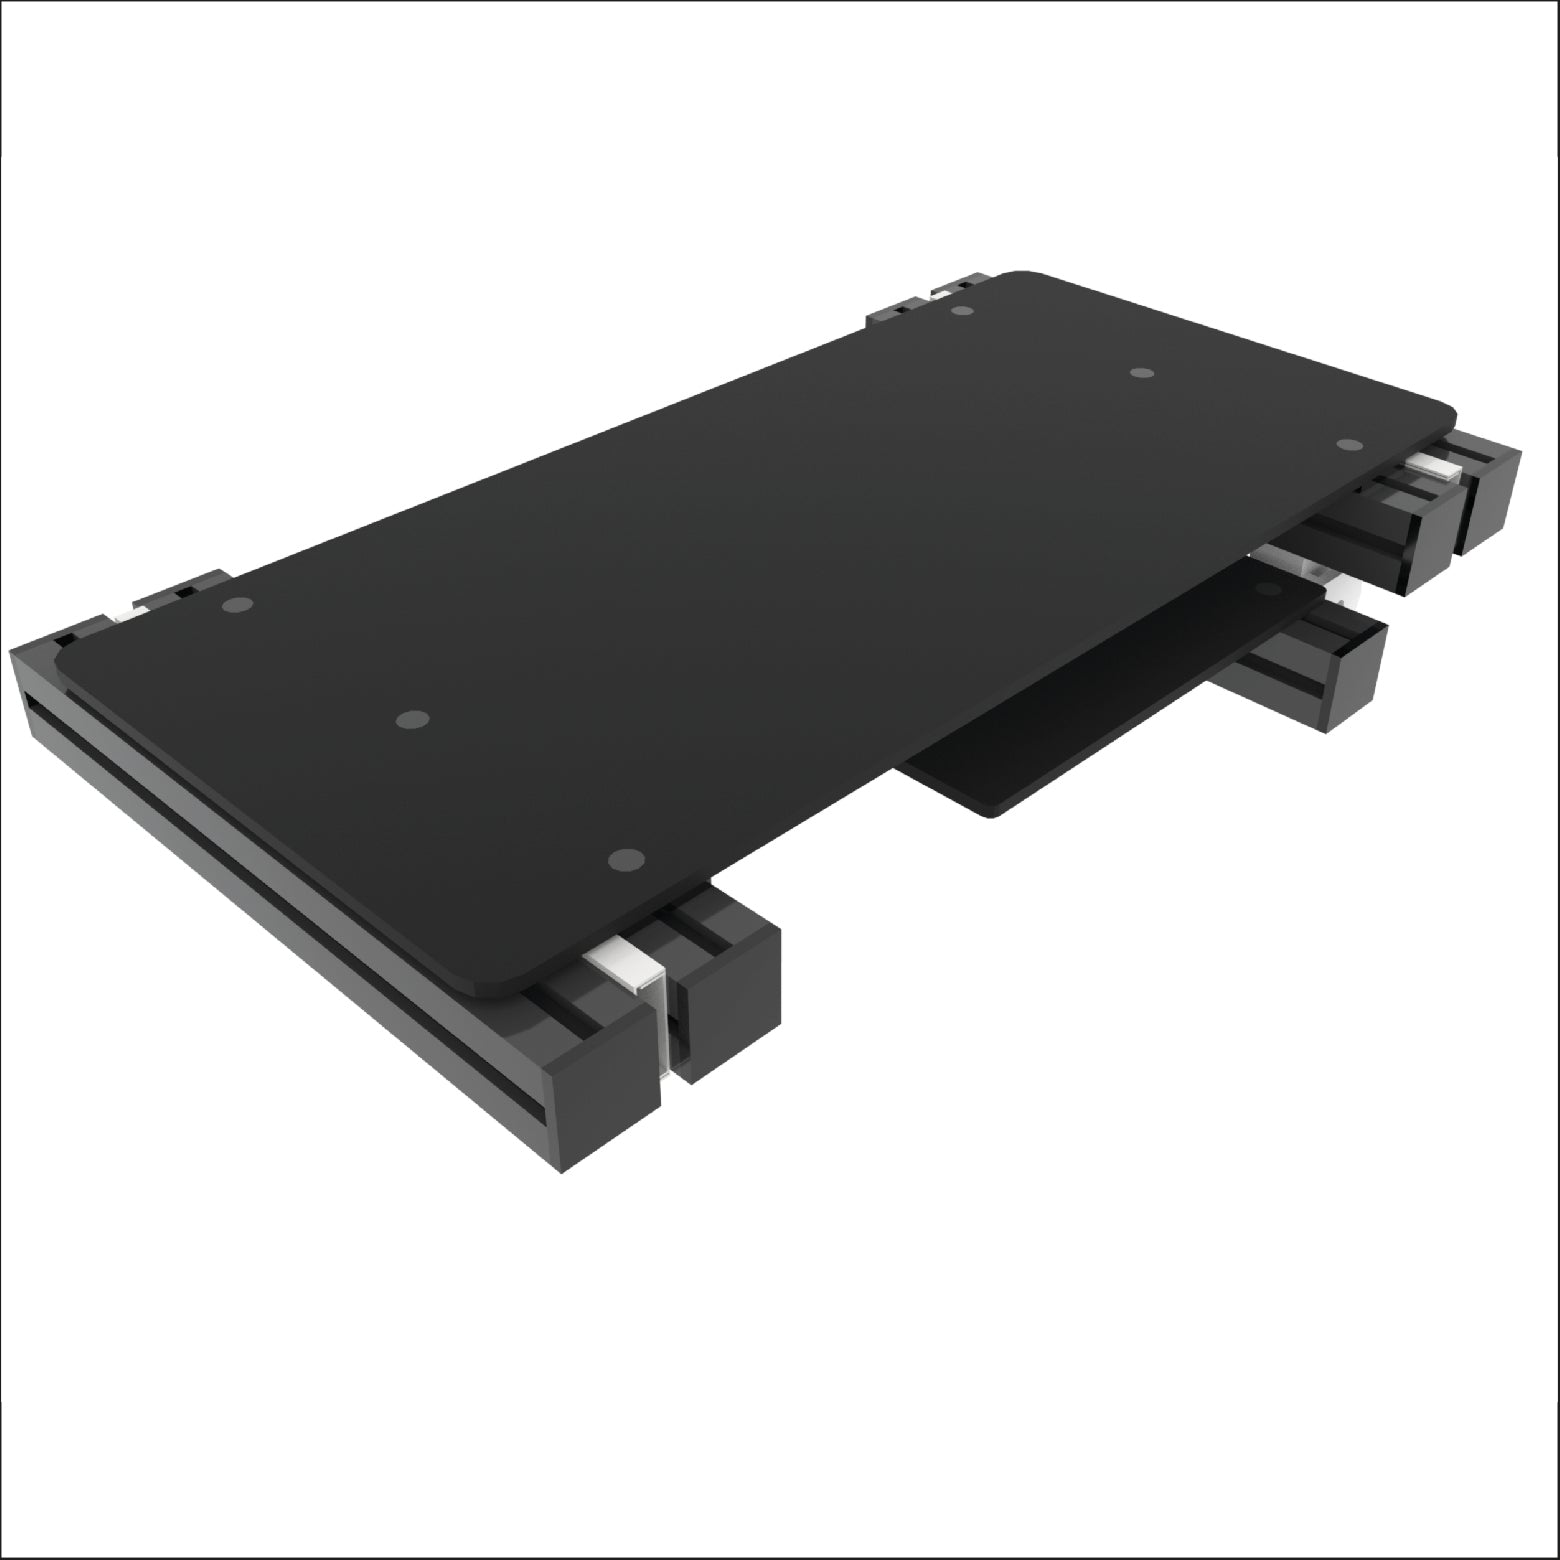 P1-ALPHA Slide in/out Keyboard, Mouse Tray